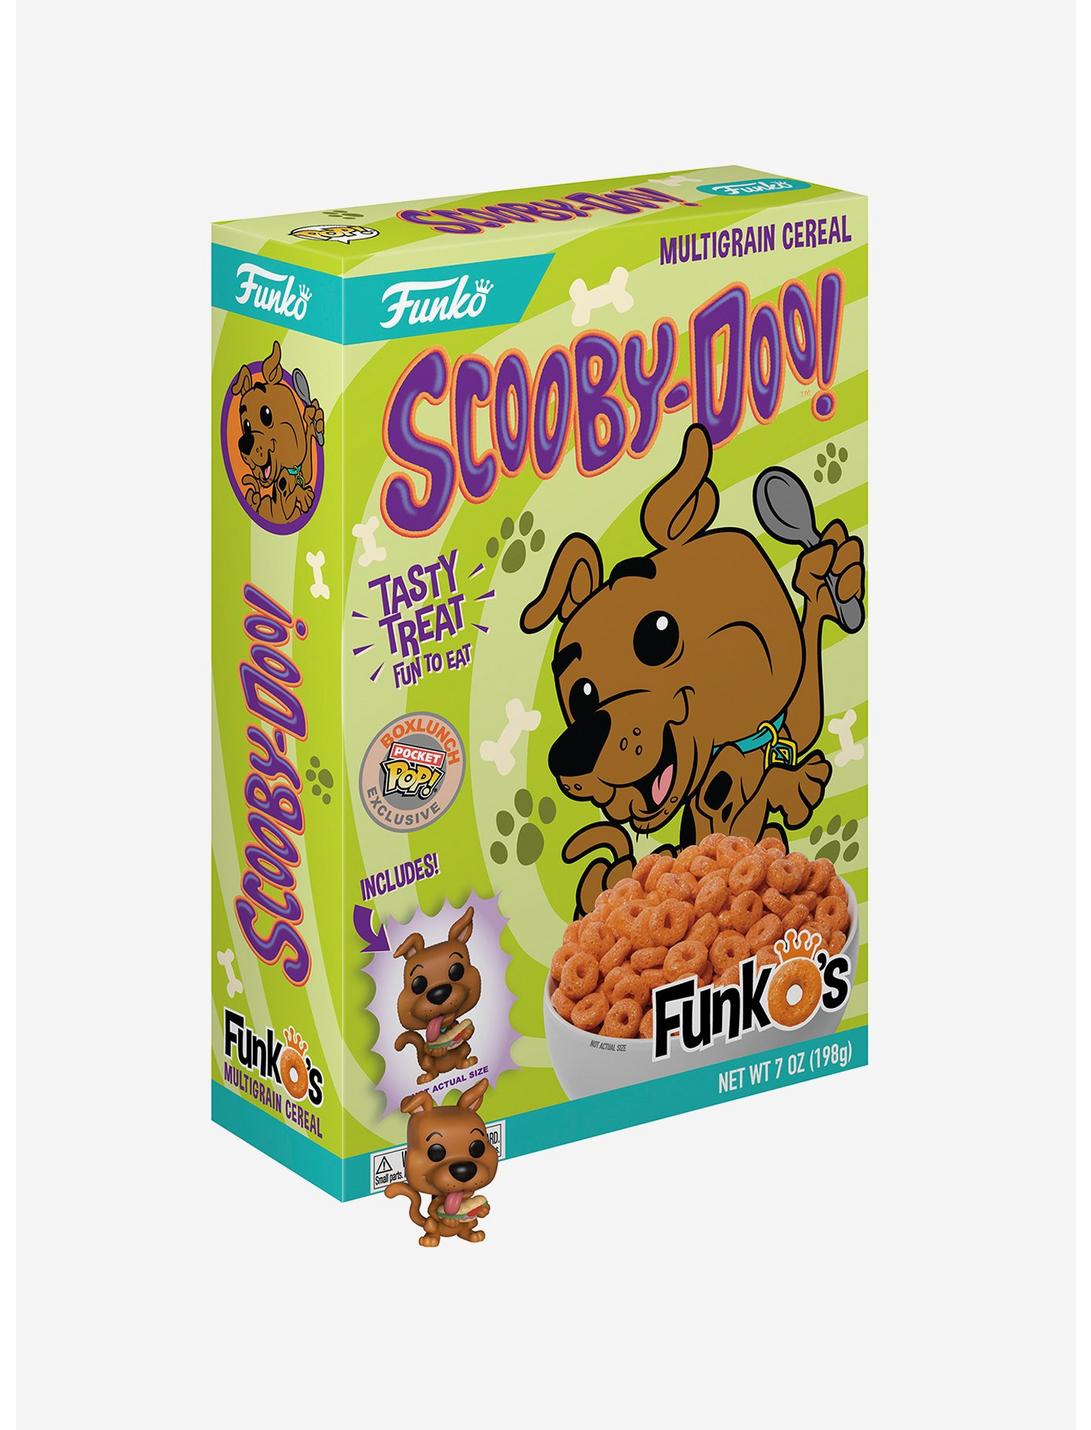 Funko Scooby-Doo FunkO's Cereal with Pocket Pop! Scooby-Doo Cereal - BoxLunch Exclusive, , hi-res